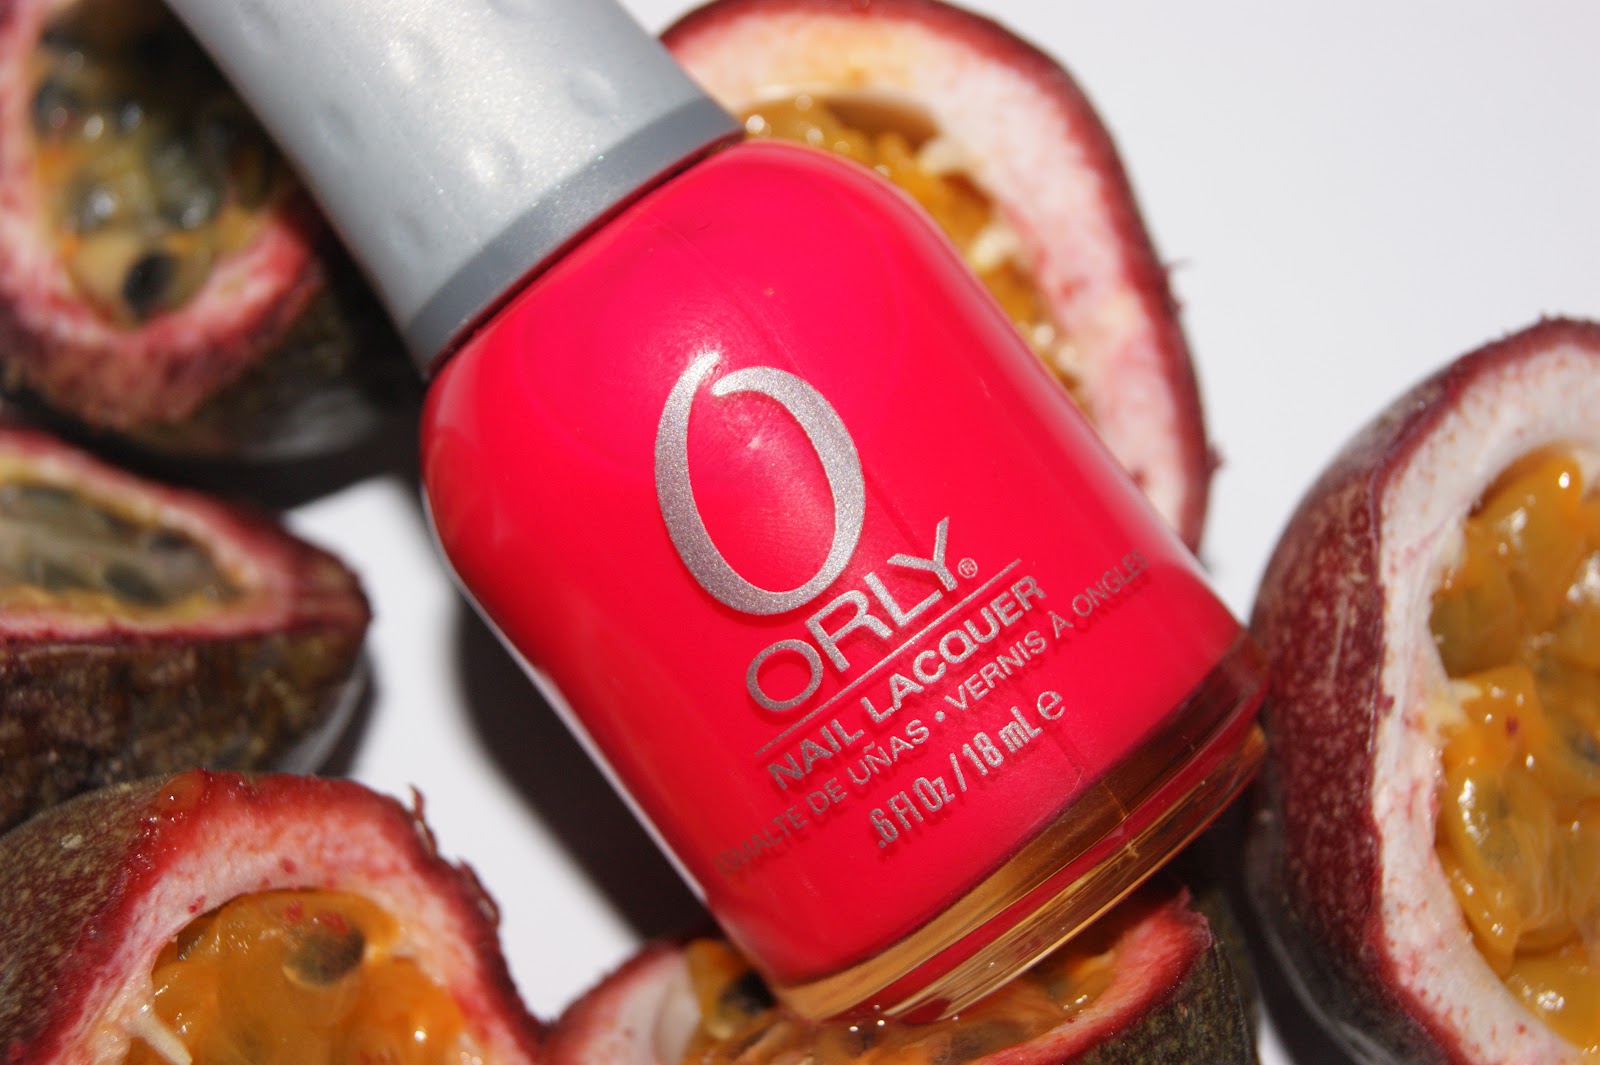 10. "Strawberry Sorbet" Nail Lacquer by Orly - wide 8